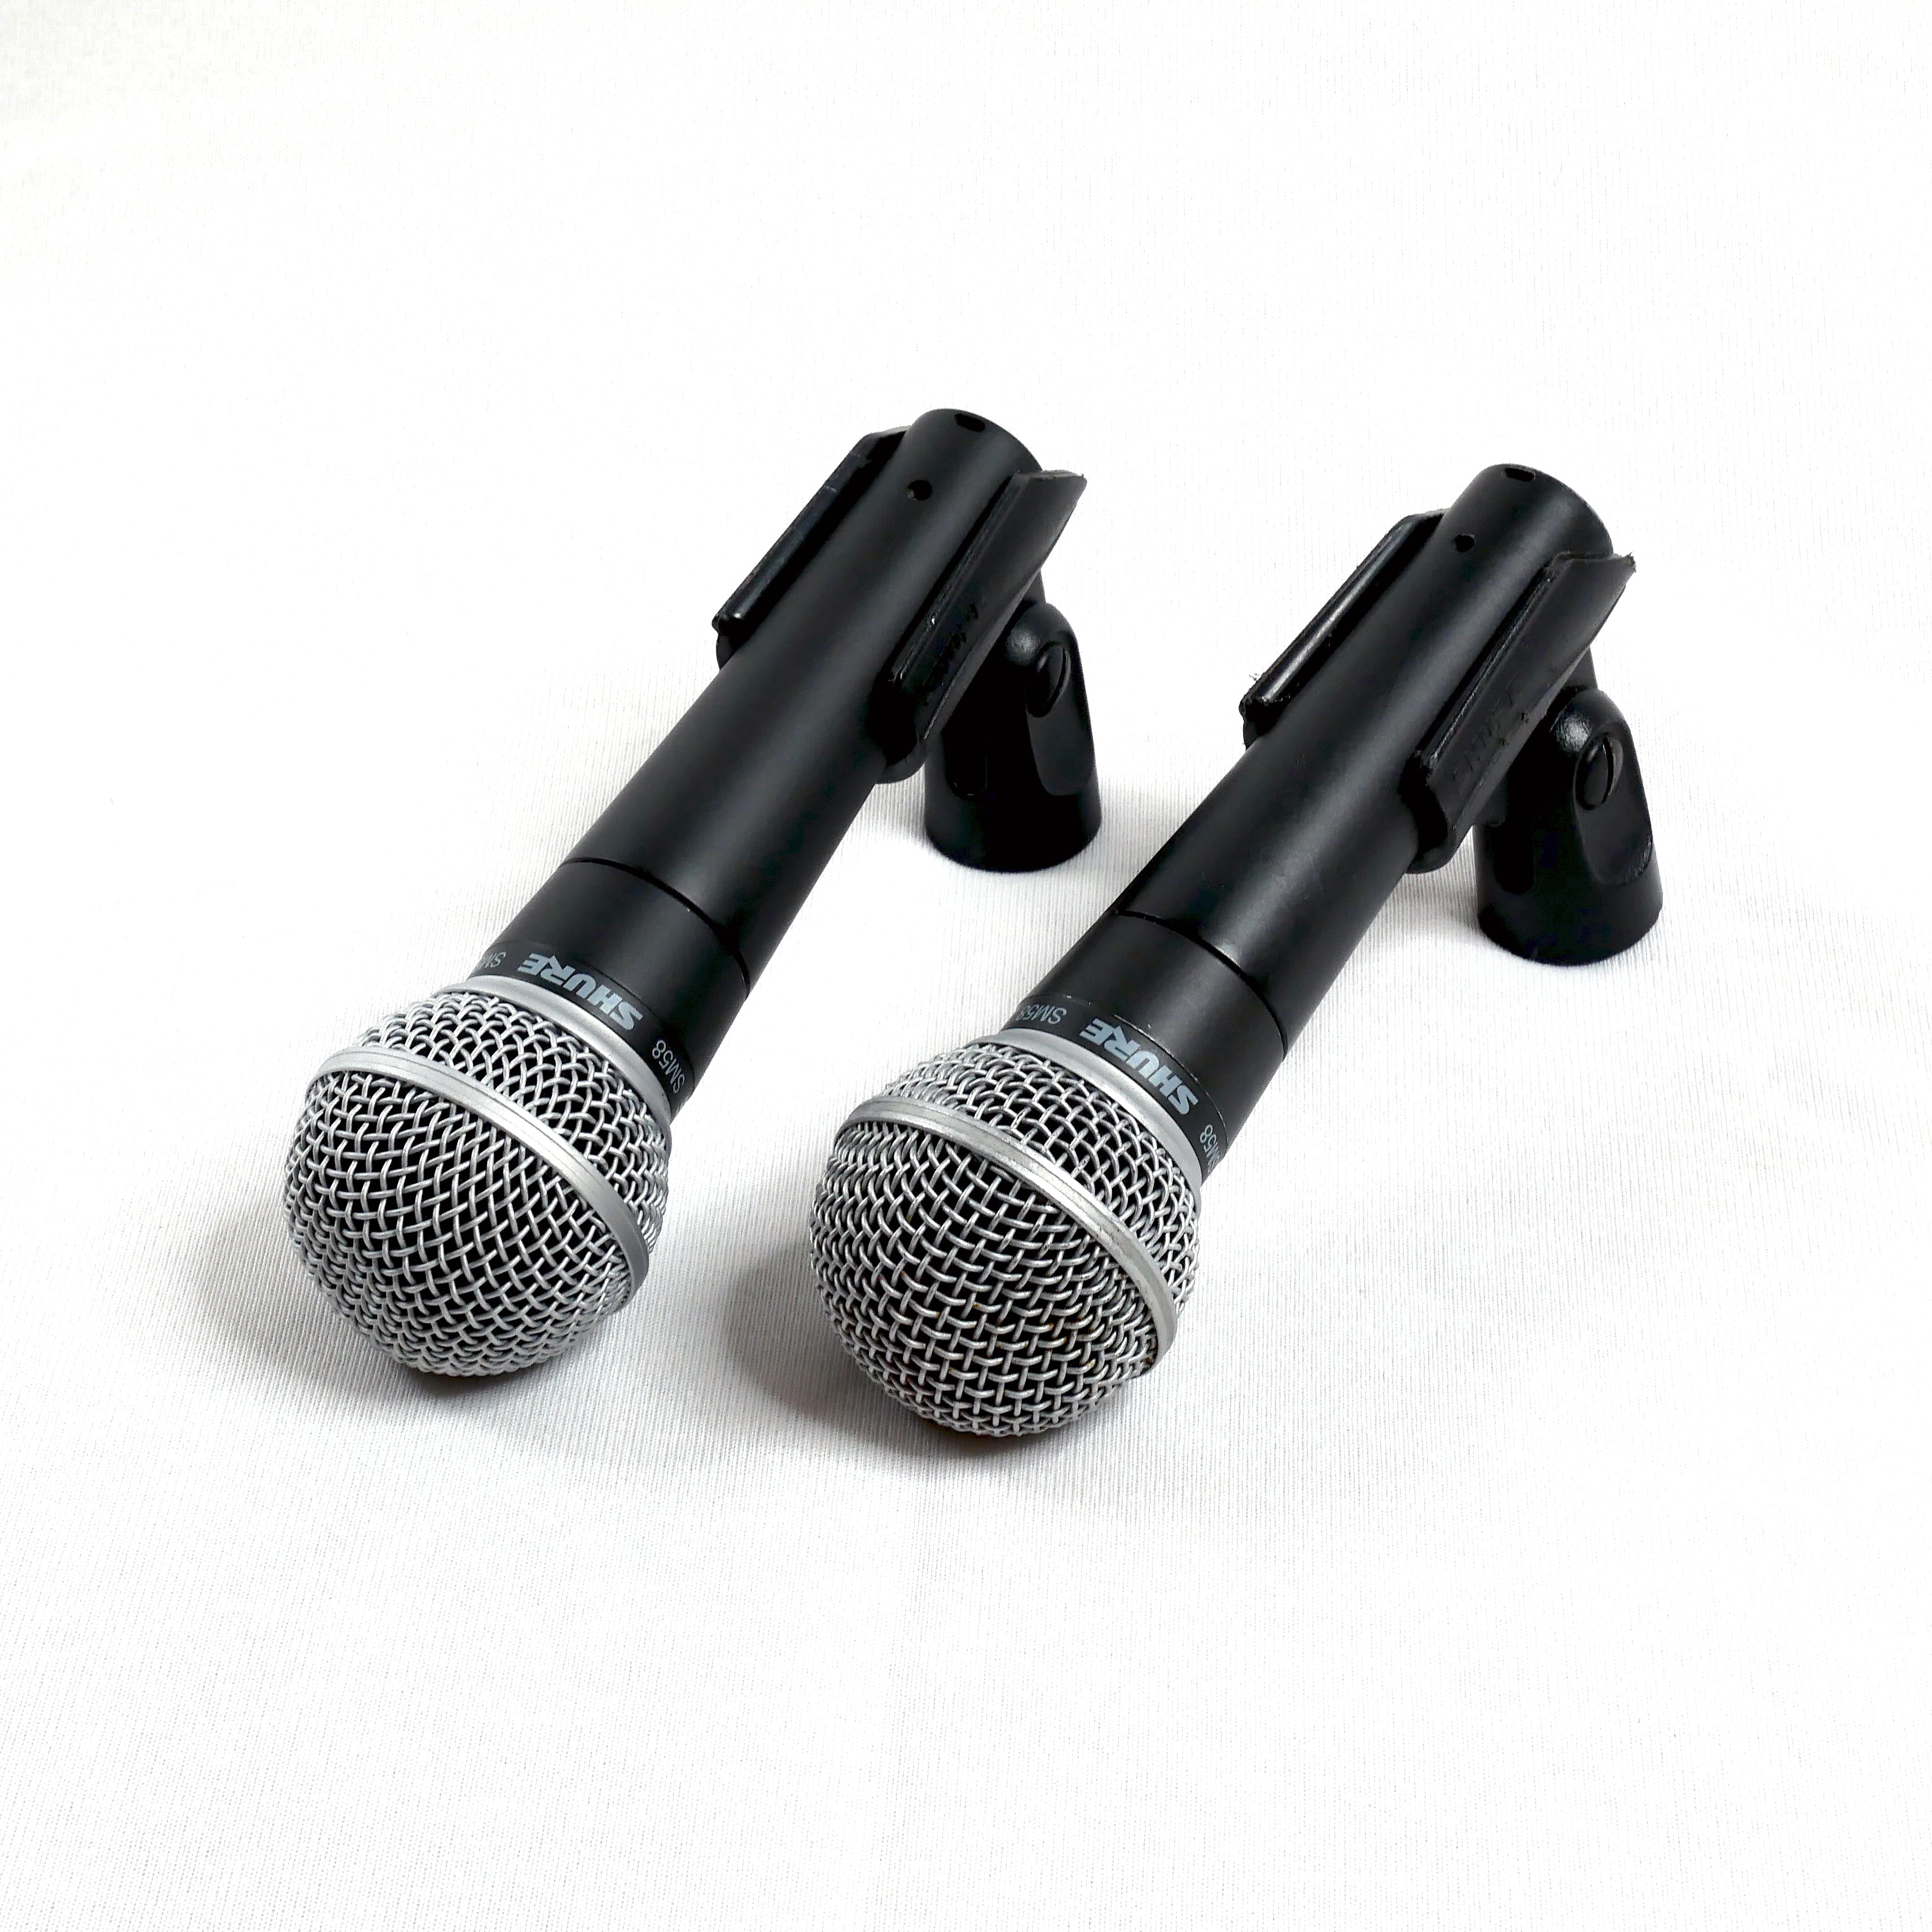 Pair of Used Shure SM58